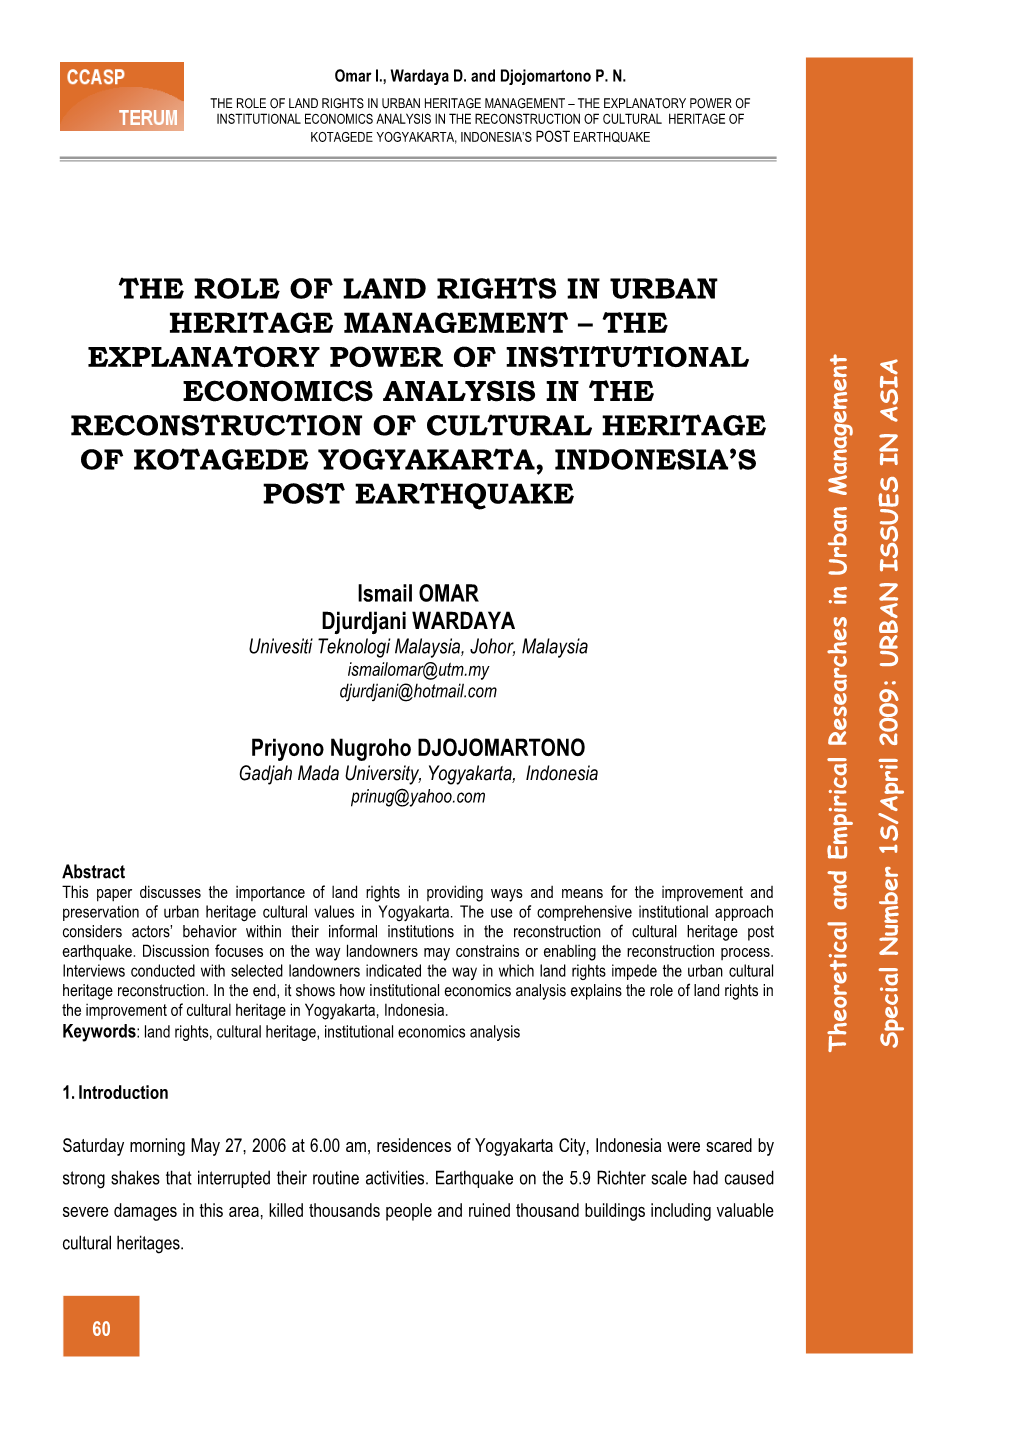 The Explanatory Power of Institutional Economics Analysis in the Reconstruction of Cultural Heritage of Kotagede Yogyakarta, Indonesia’S Post Earthquake